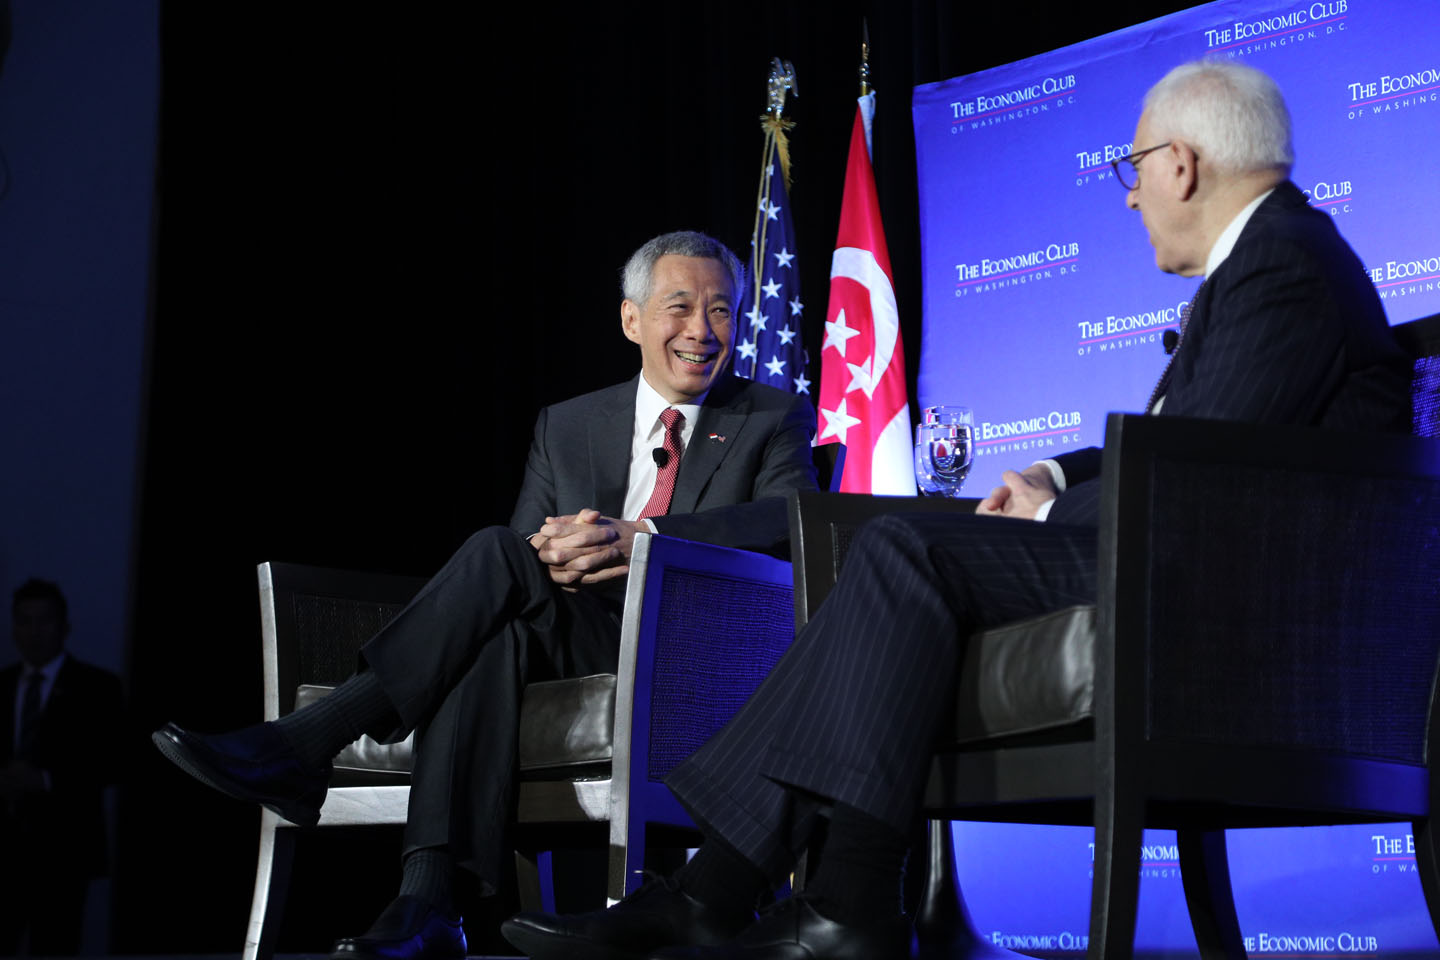 Economic Club of Washington DC Interview with PM Lee Hsien Loong on 23 Oct 2017 (MCI Photo by Kenji Soon)